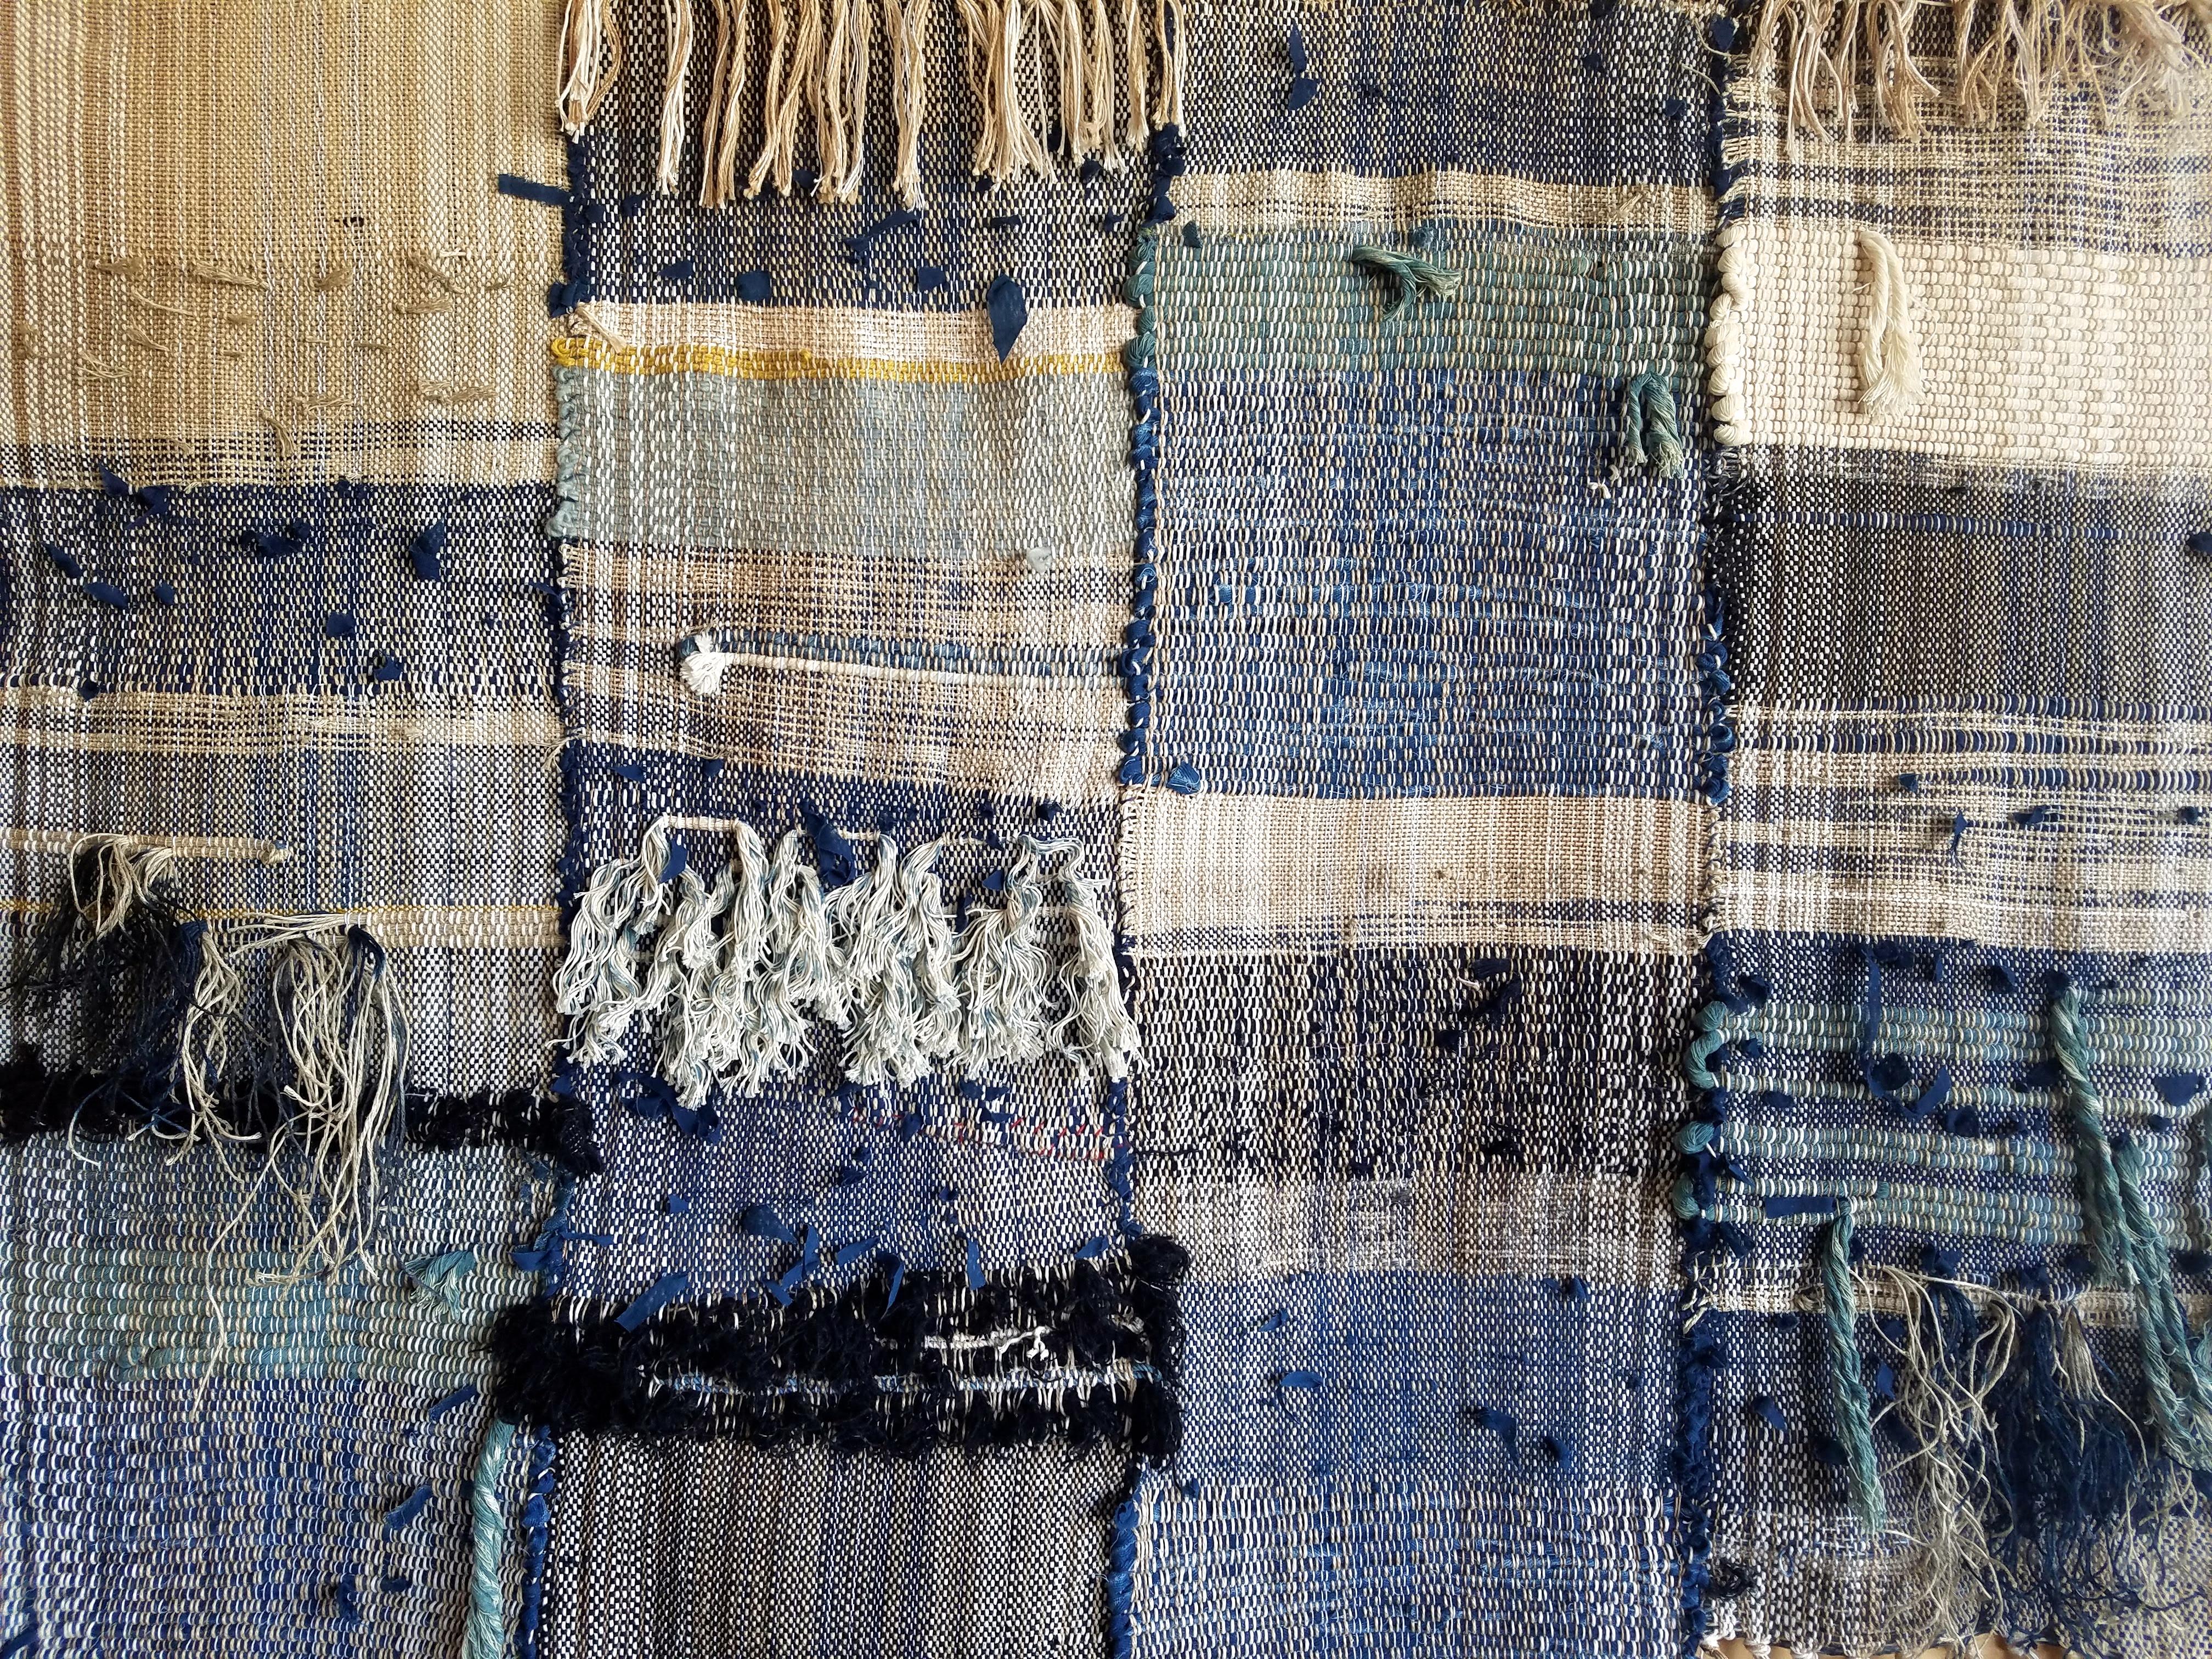 Handwoven wall hanging by Janelle Pietrzak of All Roads. Shades of indigo, navy blue, cream and black. This piece is multiple woven panels hand-stitched together to make one piece. 

Fibers used are cotton, linen and wool weaving hangs from a steel